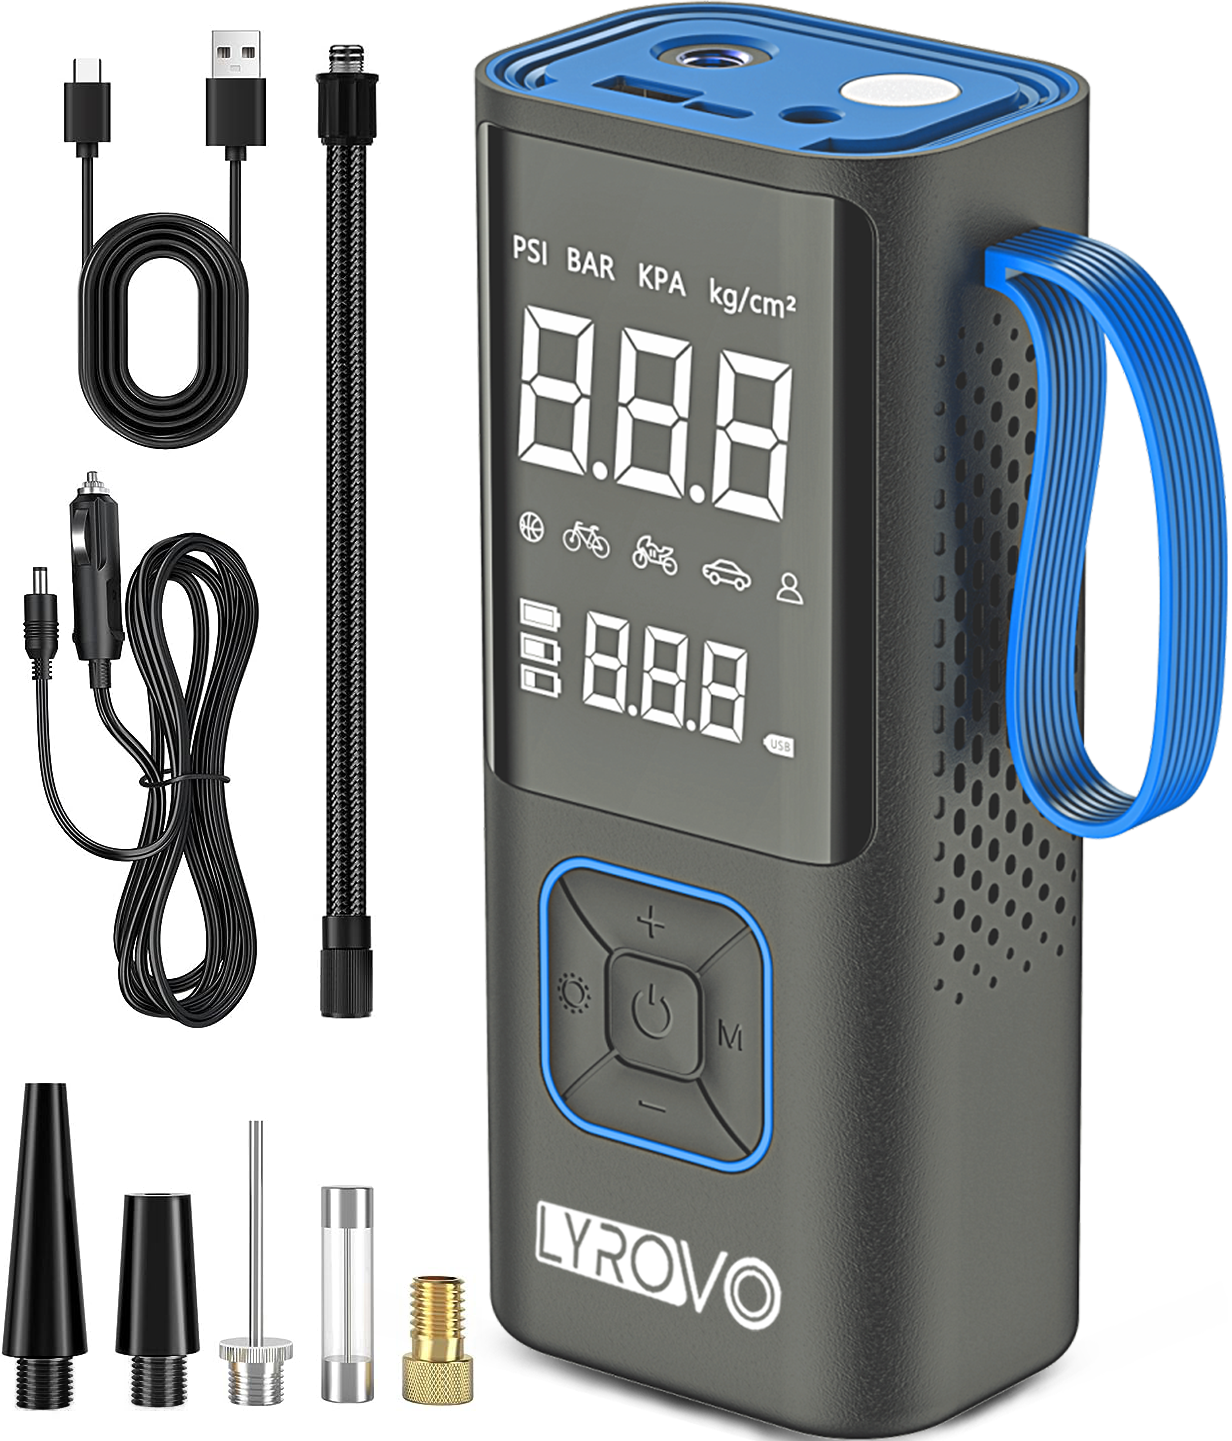 150 PSI Tire inflator portable air compressor with LCD Display